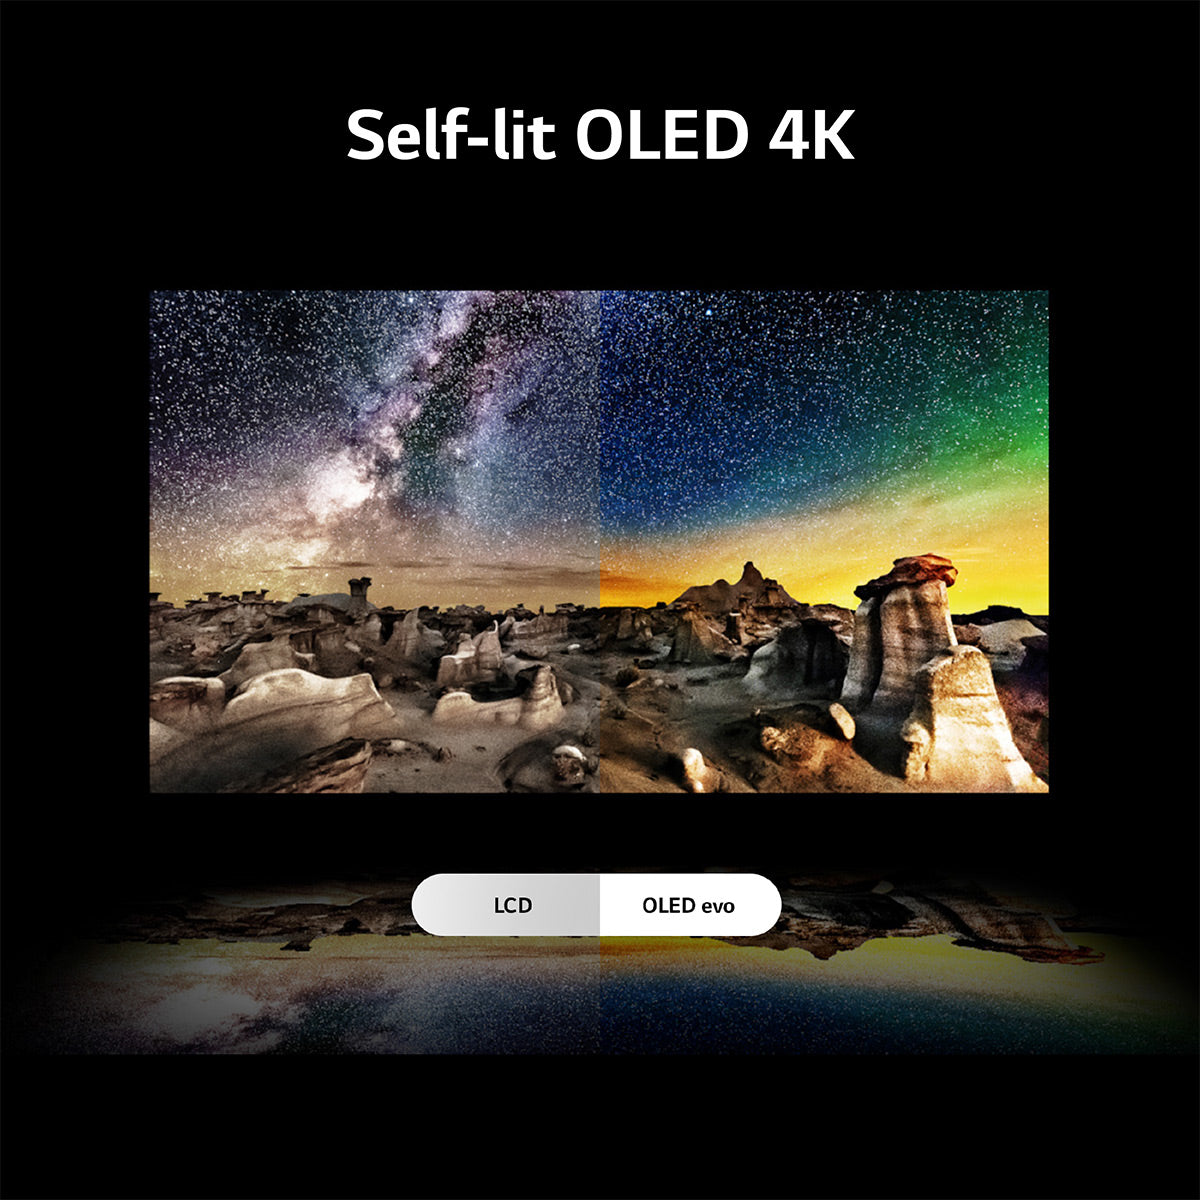 LG OLED97M3PUA 97" 4K UHD OLED Smart evo TV with A9 Gen 6 Intelligent Processor and Wireless Zero Connect Technology (2023)